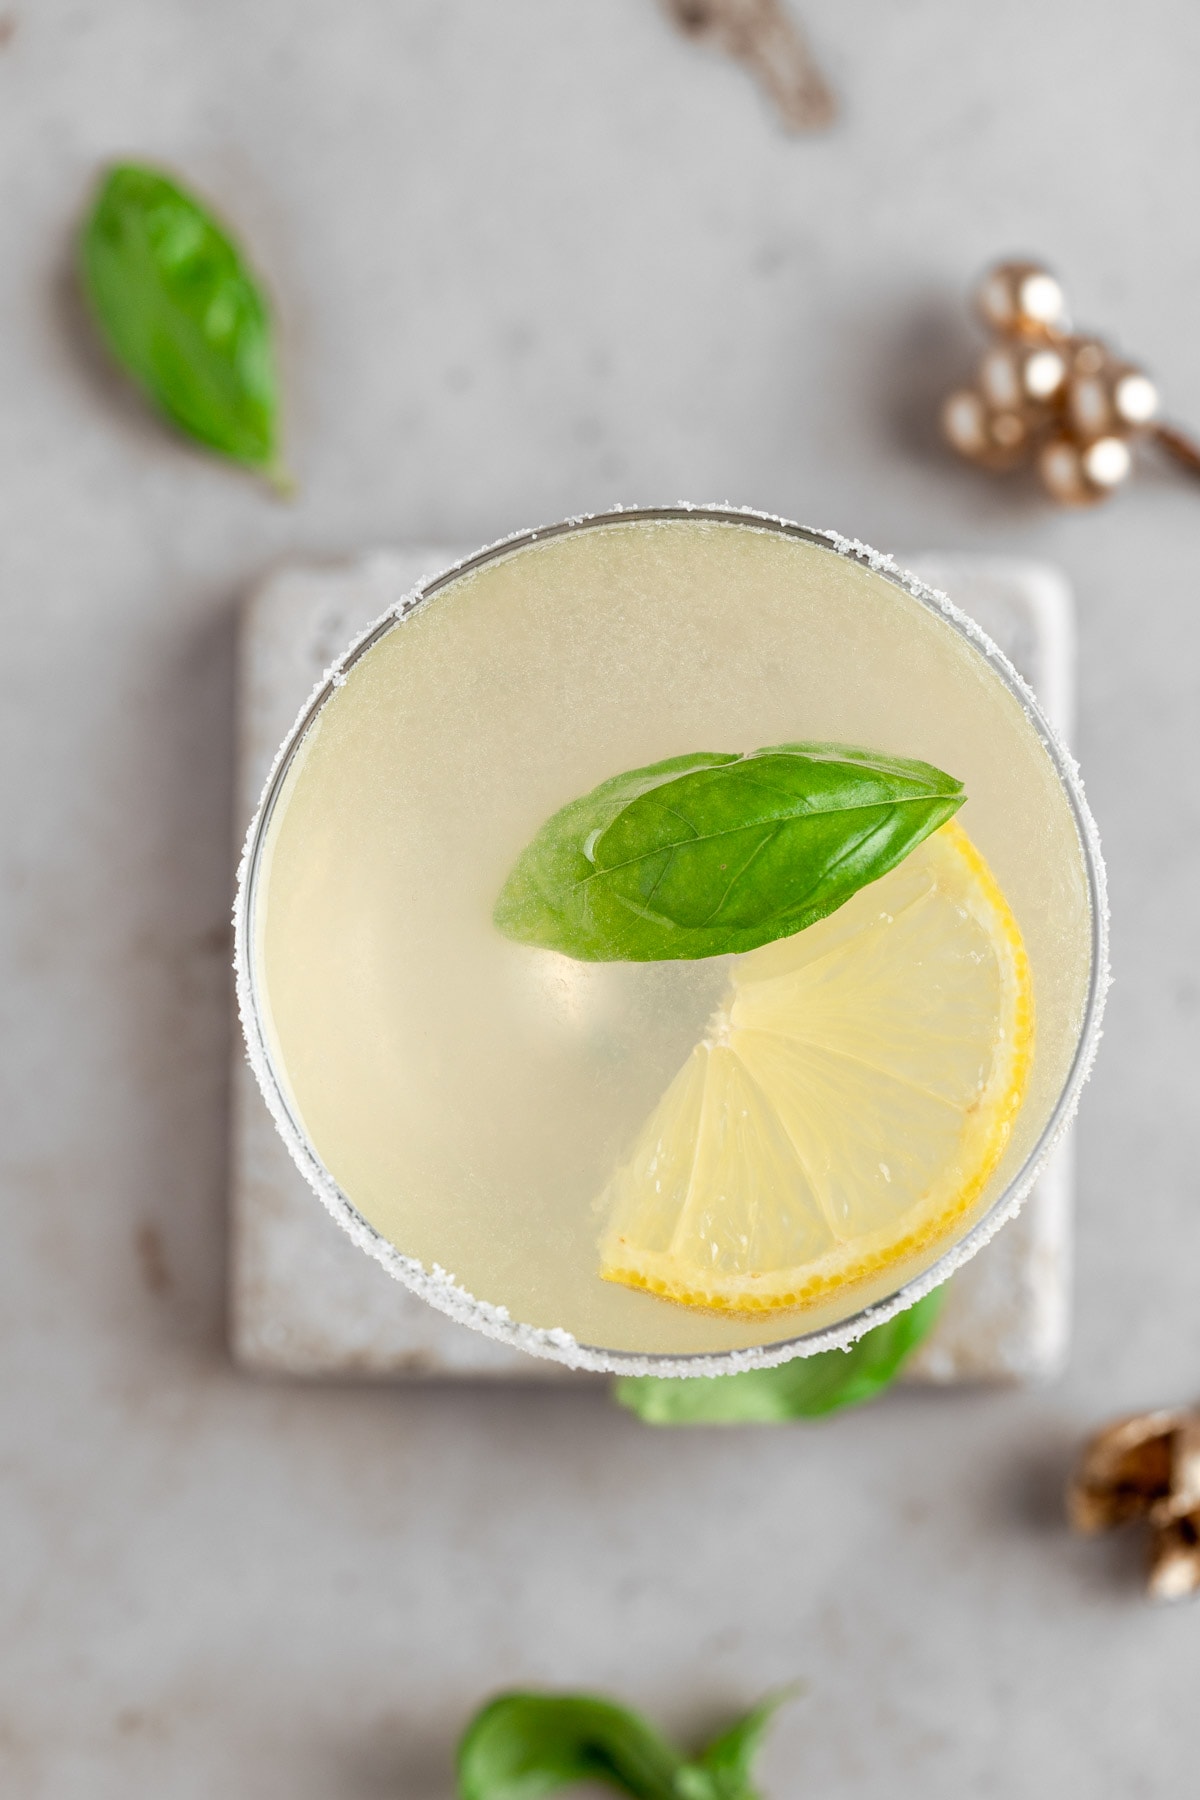 Overhead view of a lemon basil martini garnished with a basil leave and a lemon wedge.